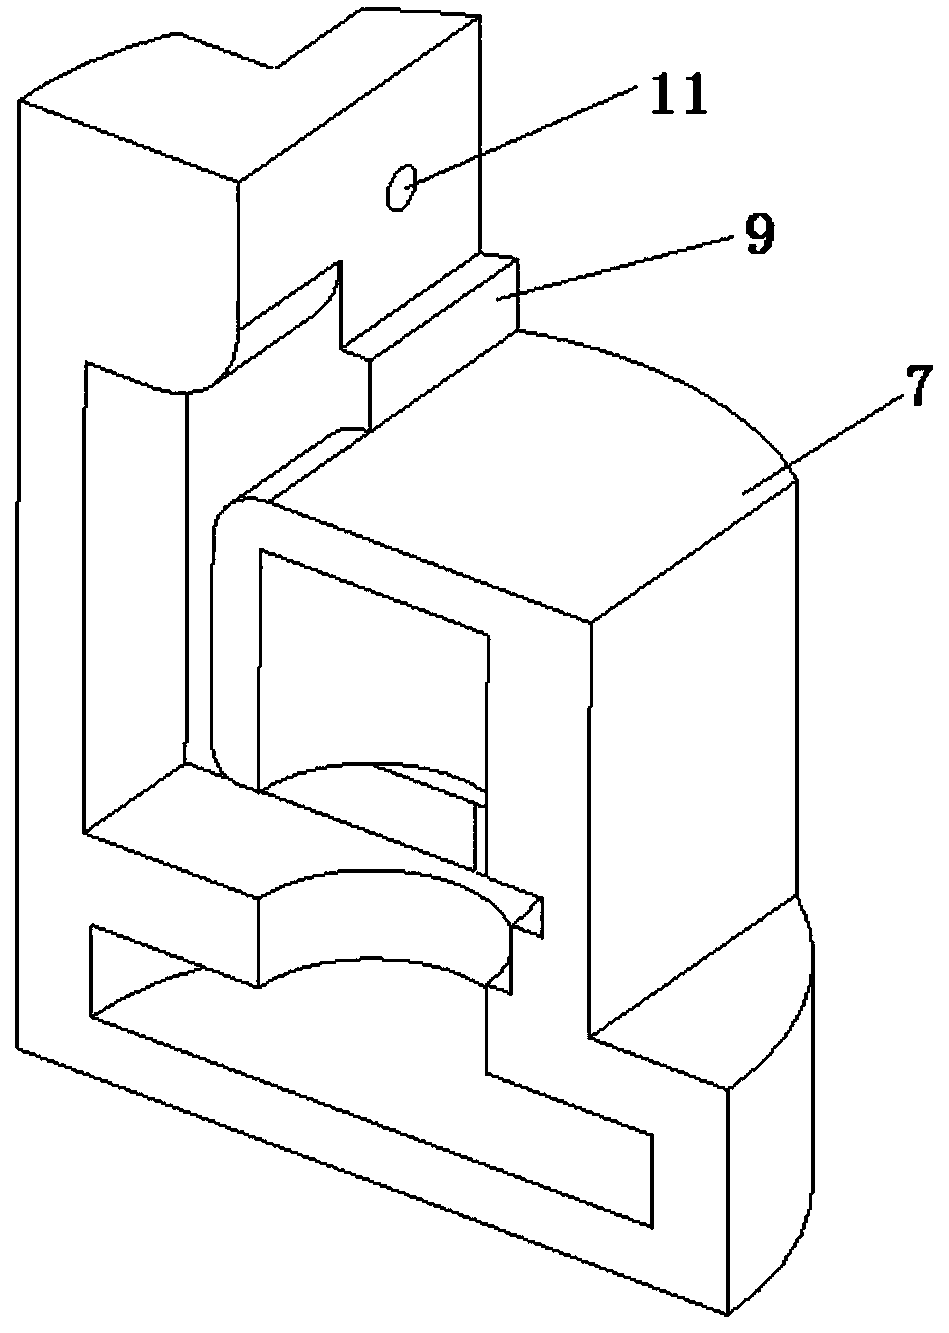 Hall proximity switch structure